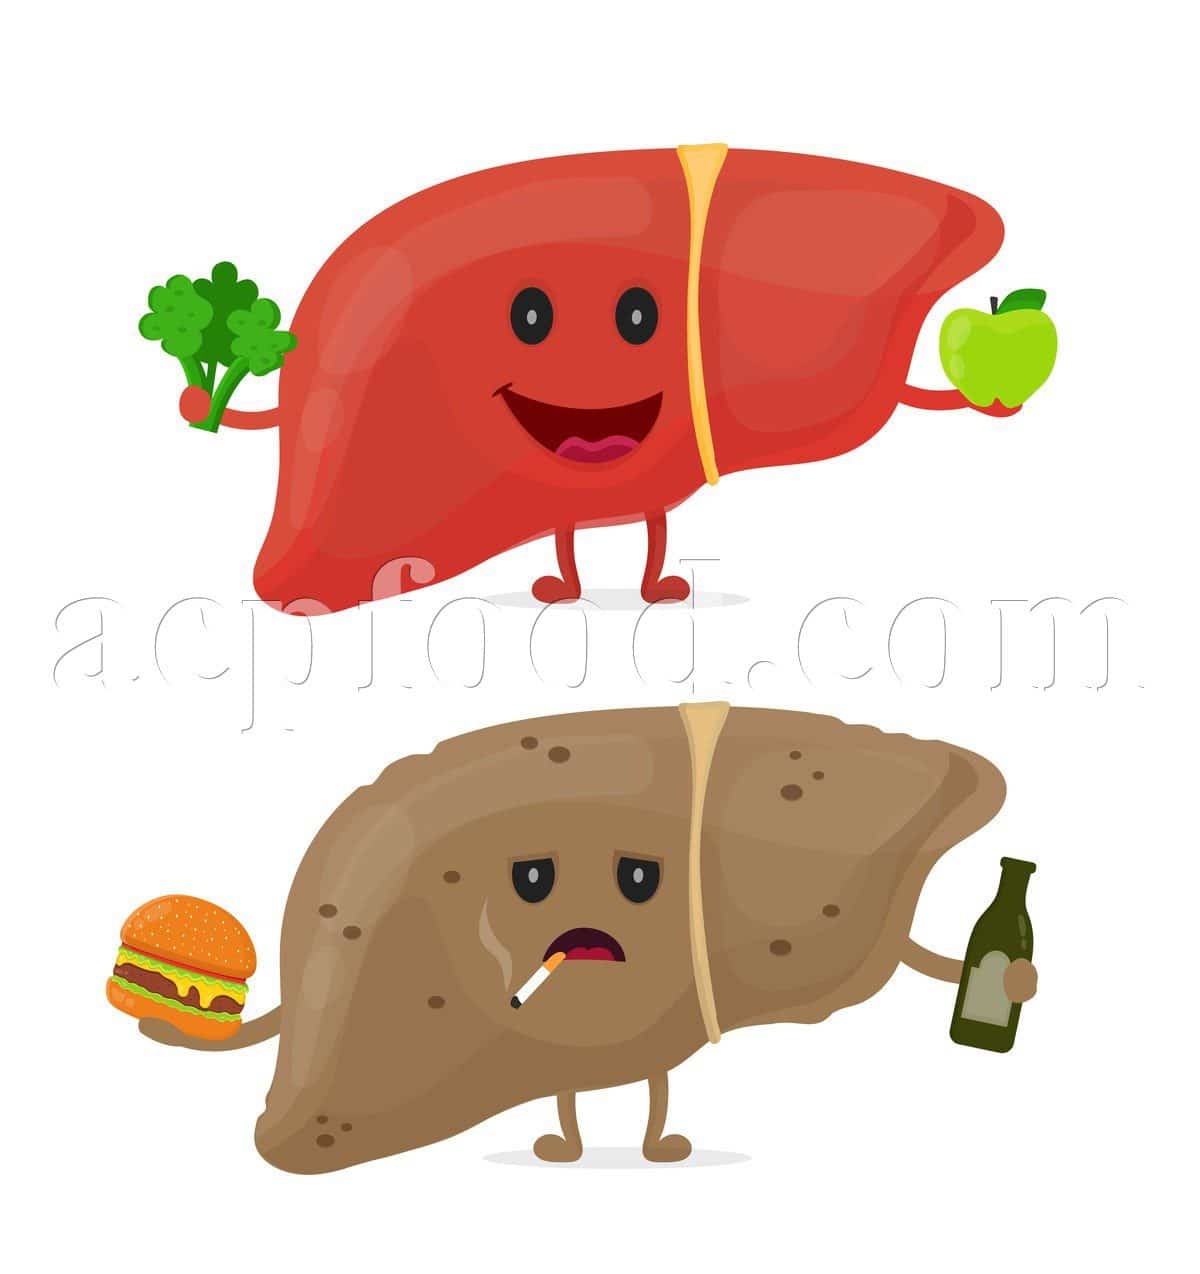 Liver Disorders in Traditional Iranian Medicine.